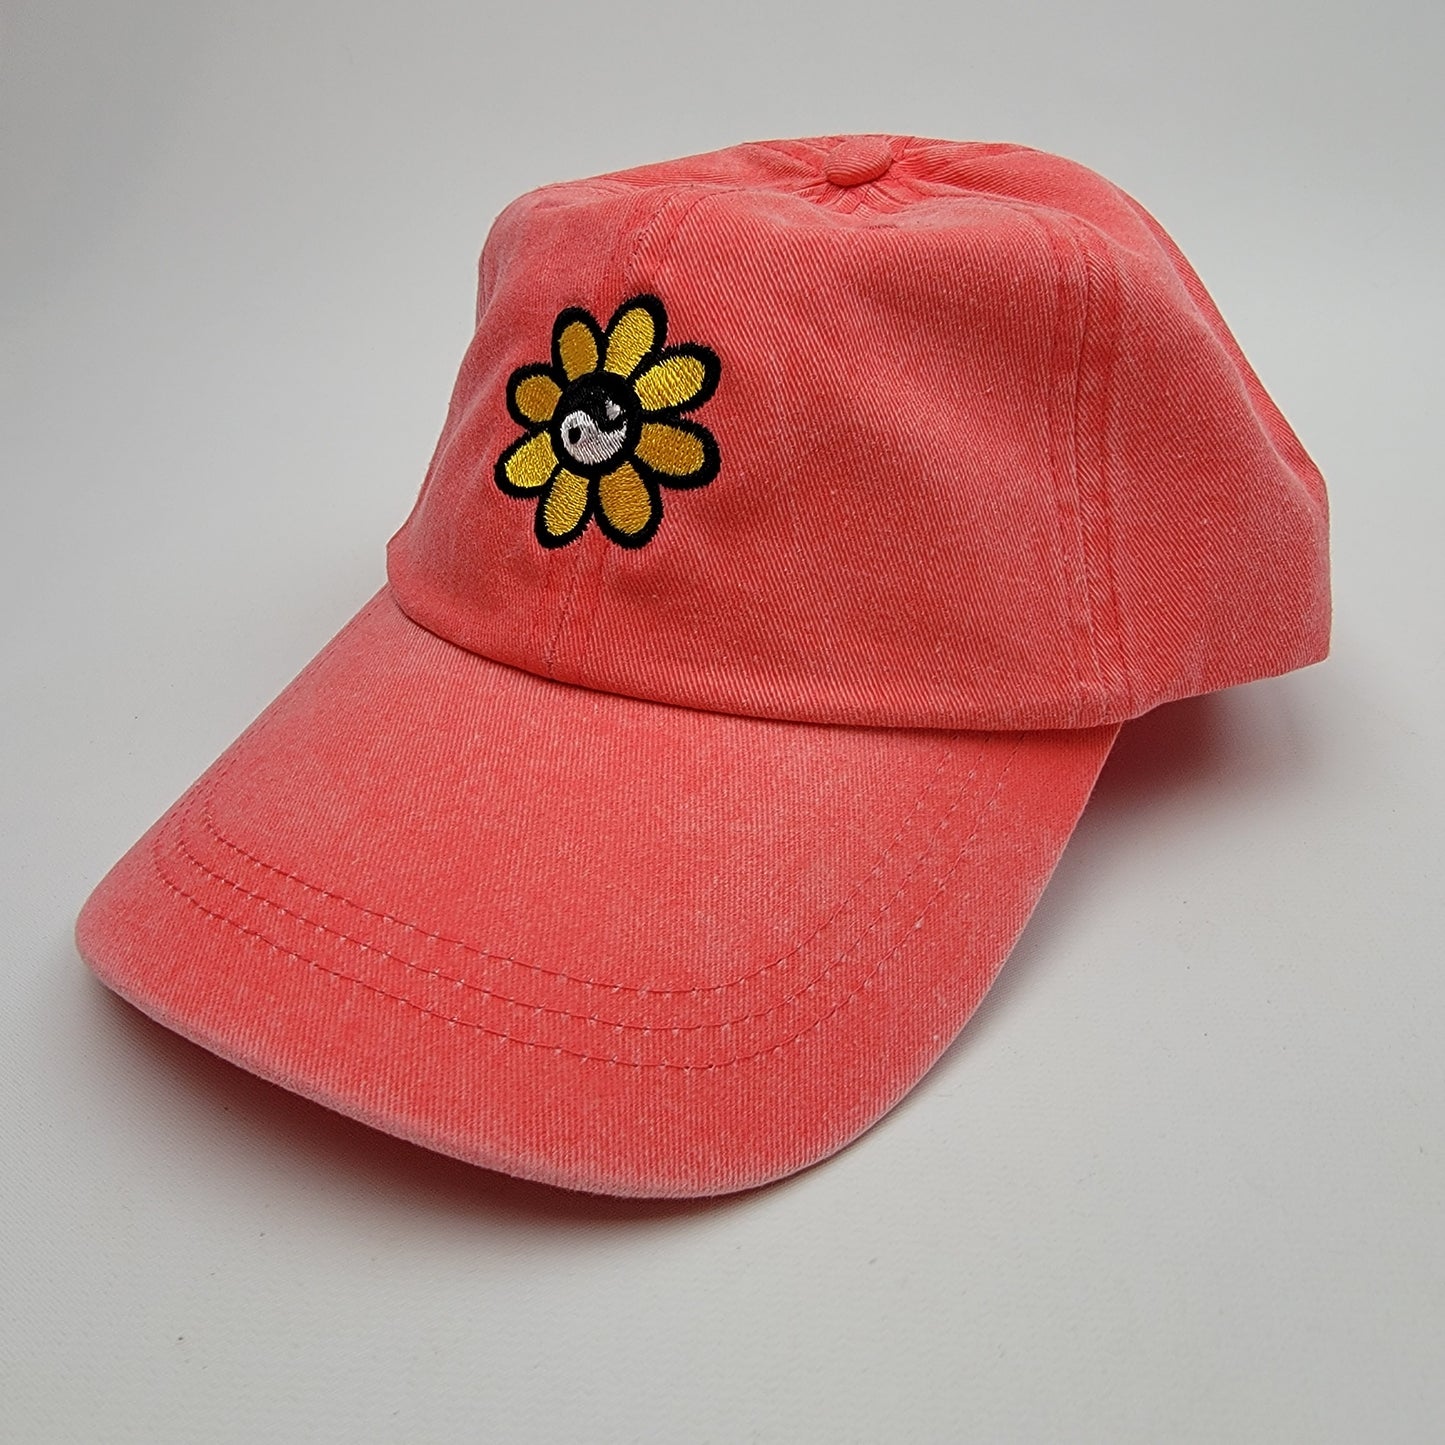 Yin & Yang Sunflower Relaxed Cotton Women's Embroidered Buckle Strap Curved Bill Hat Cap Garment Washed Orange